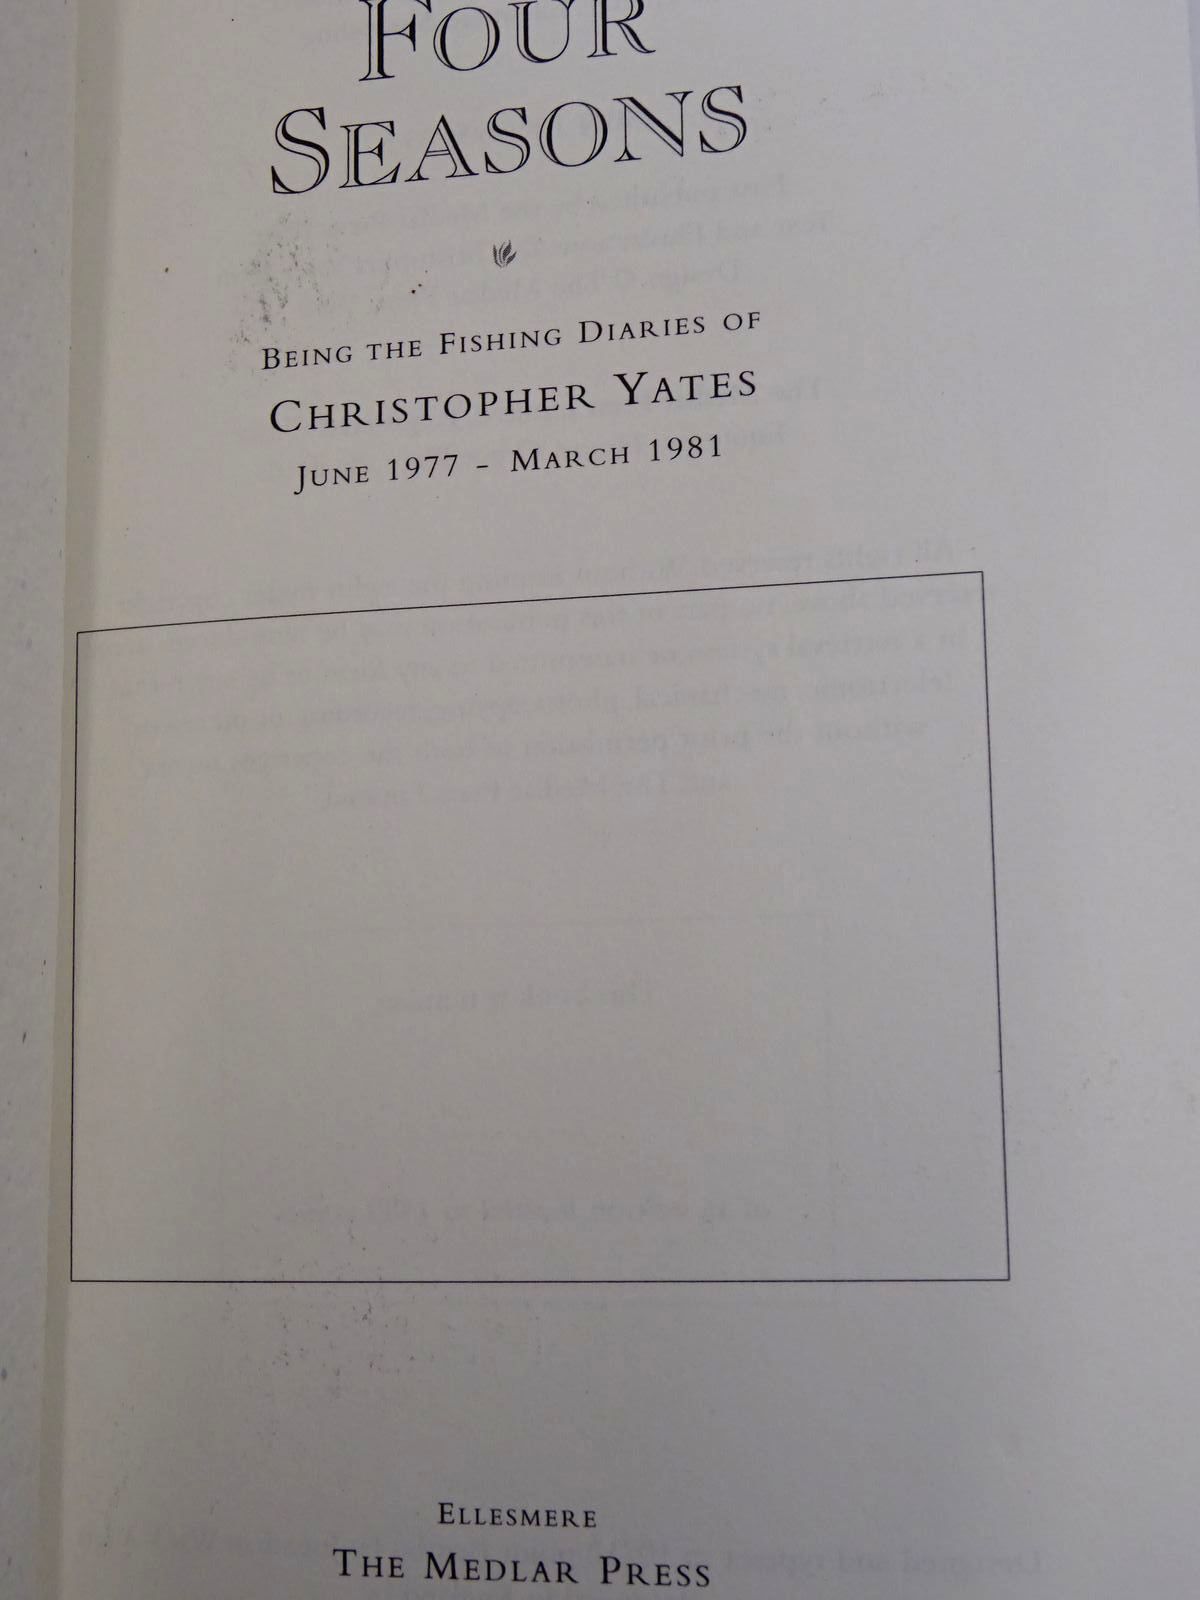 Photo of FOUR SEASONS BEING THE FISHING DIARIES OF CHRISTOPHER YATES JUNE 1977 - MARCH 1981 written by Yates, Christopher published by The Medlar Press (STOCK CODE: 2129510)  for sale by Stella & Rose's Books